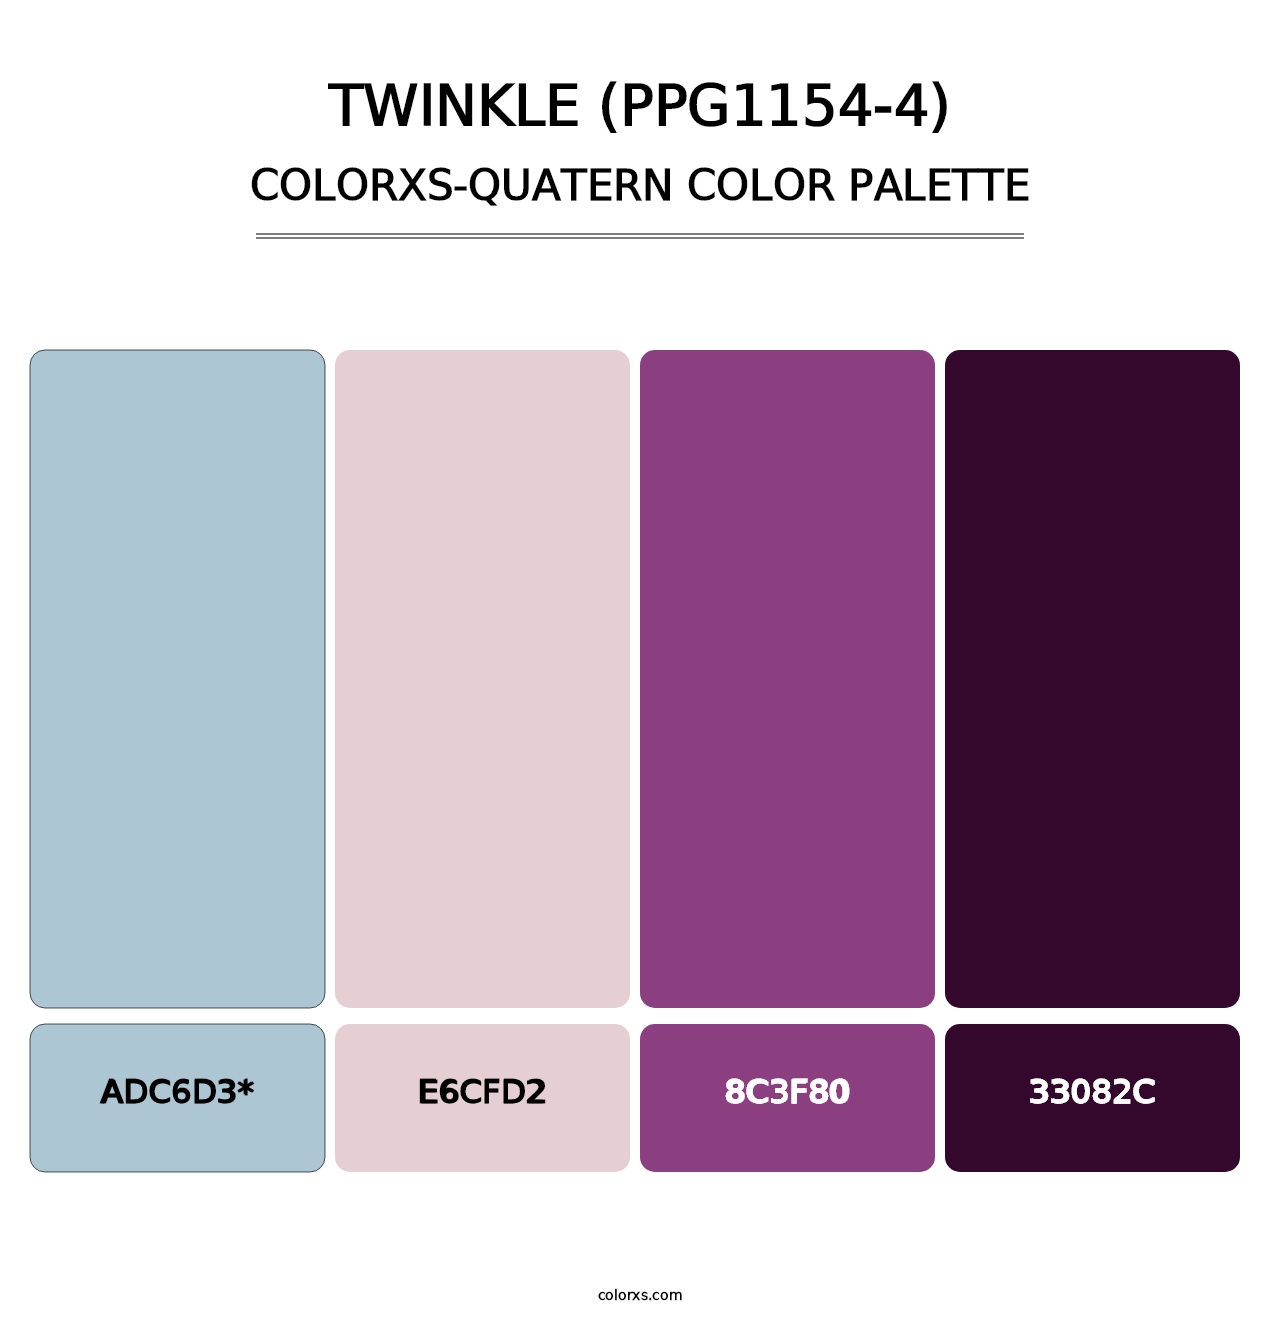 Twinkle (PPG1154-4) - Colorxs Quatern Palette